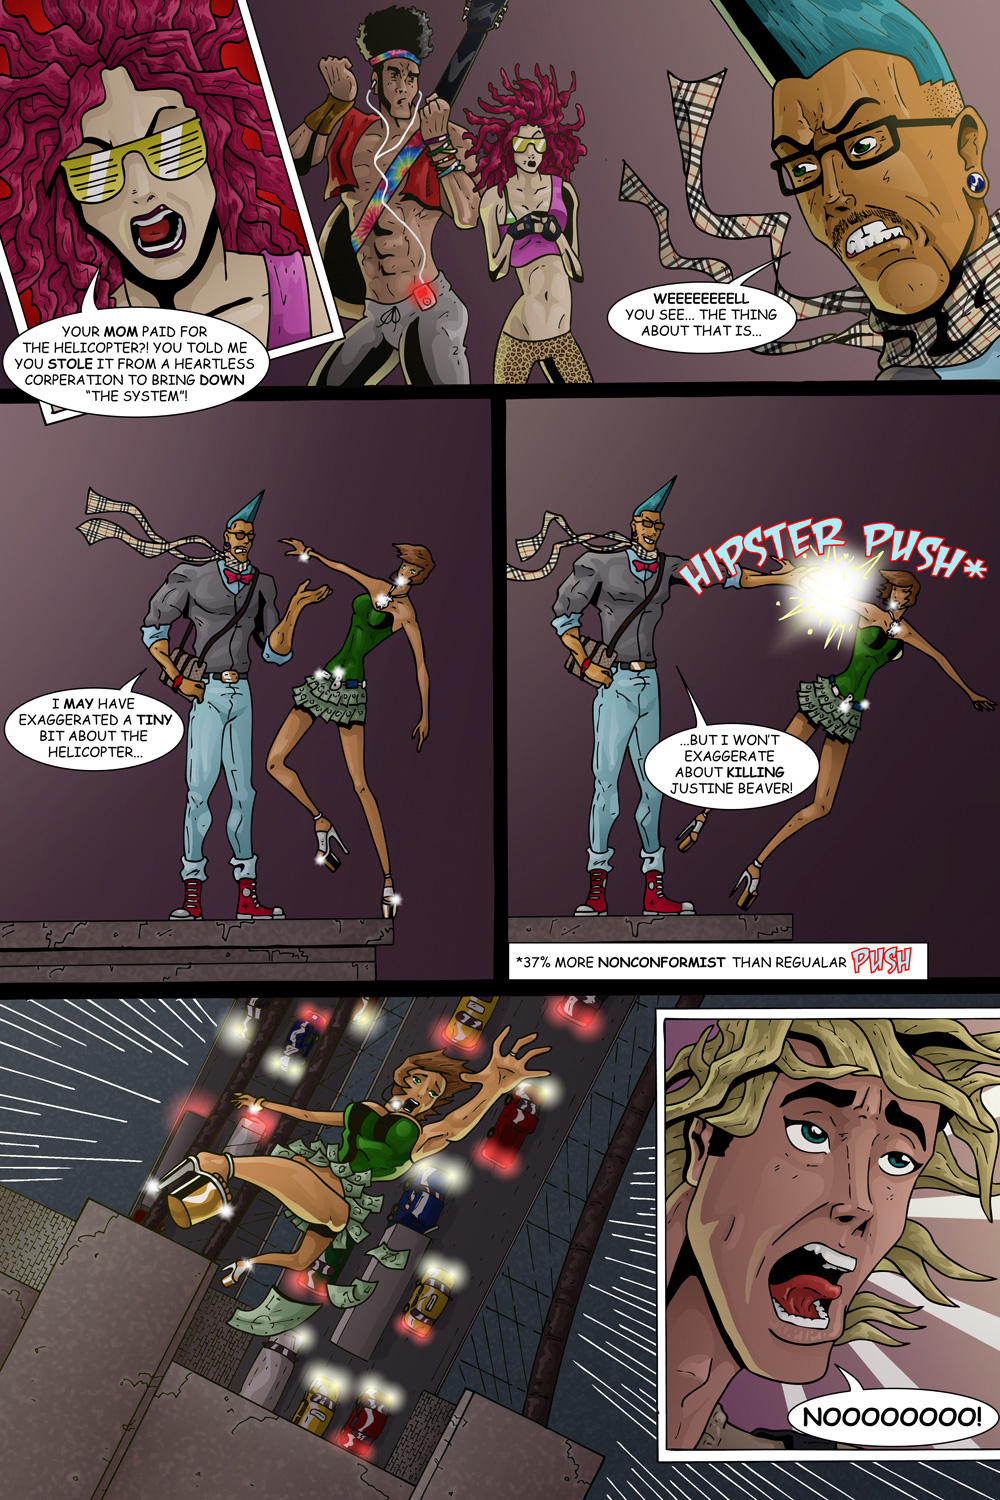 MISSION 004: PAGE 19 HIPSTER PUSH*